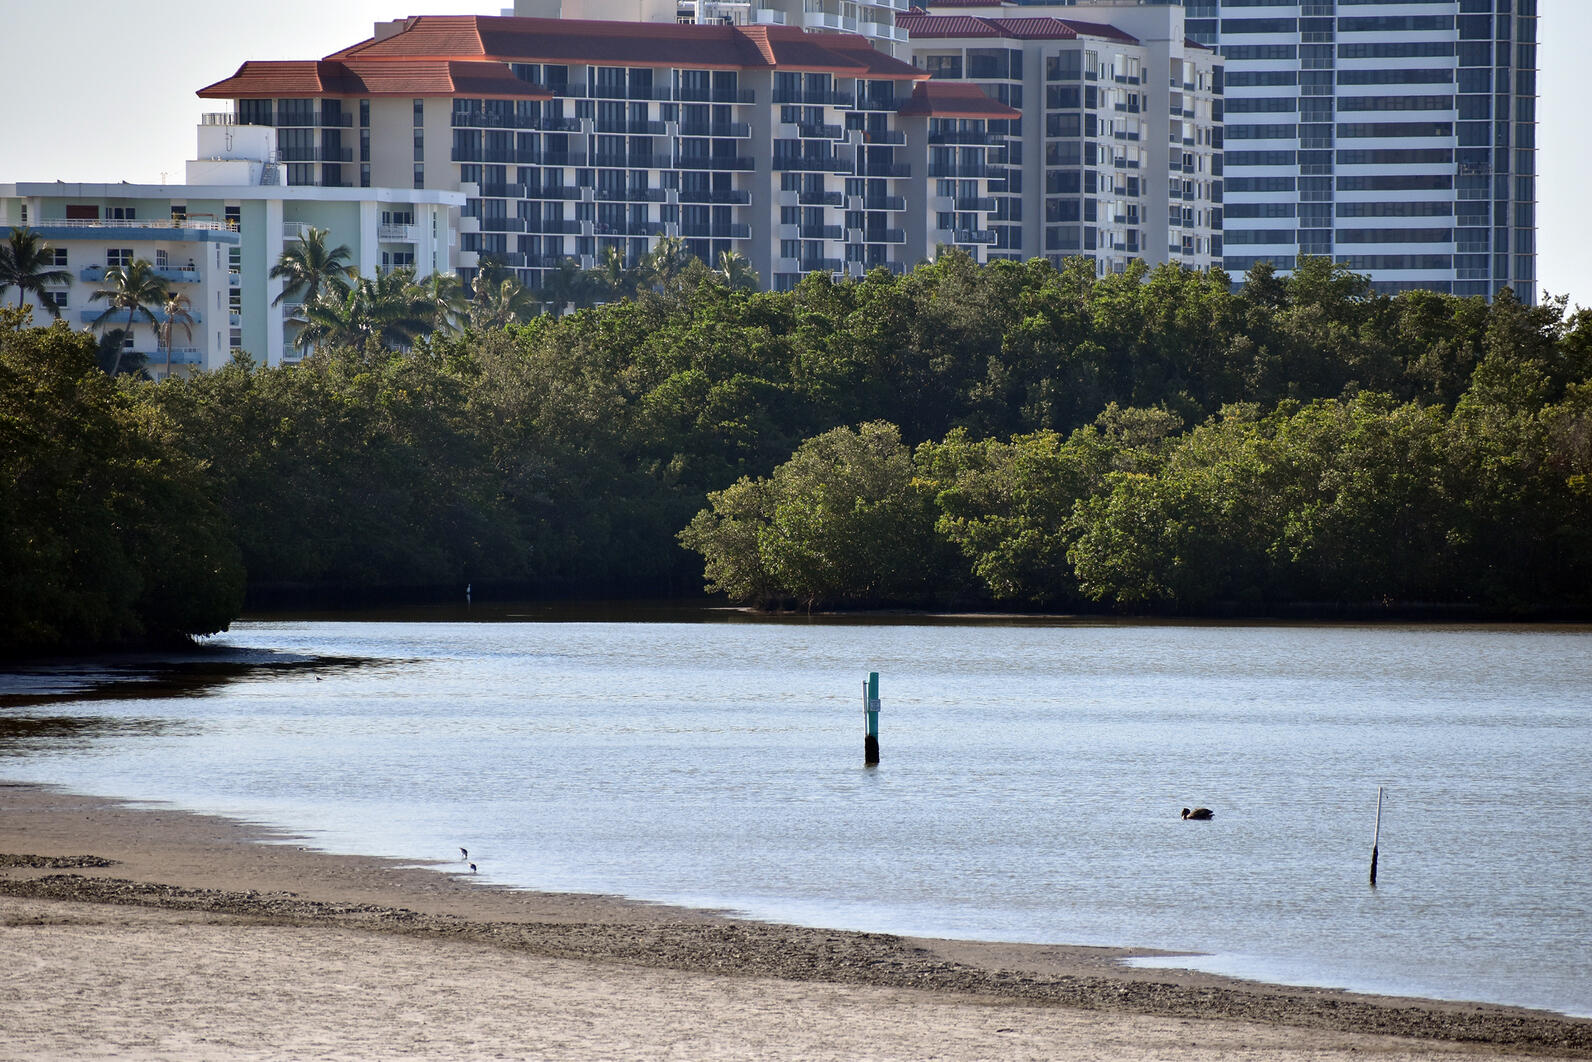 A beach with mangrove trees beyond and highrises.